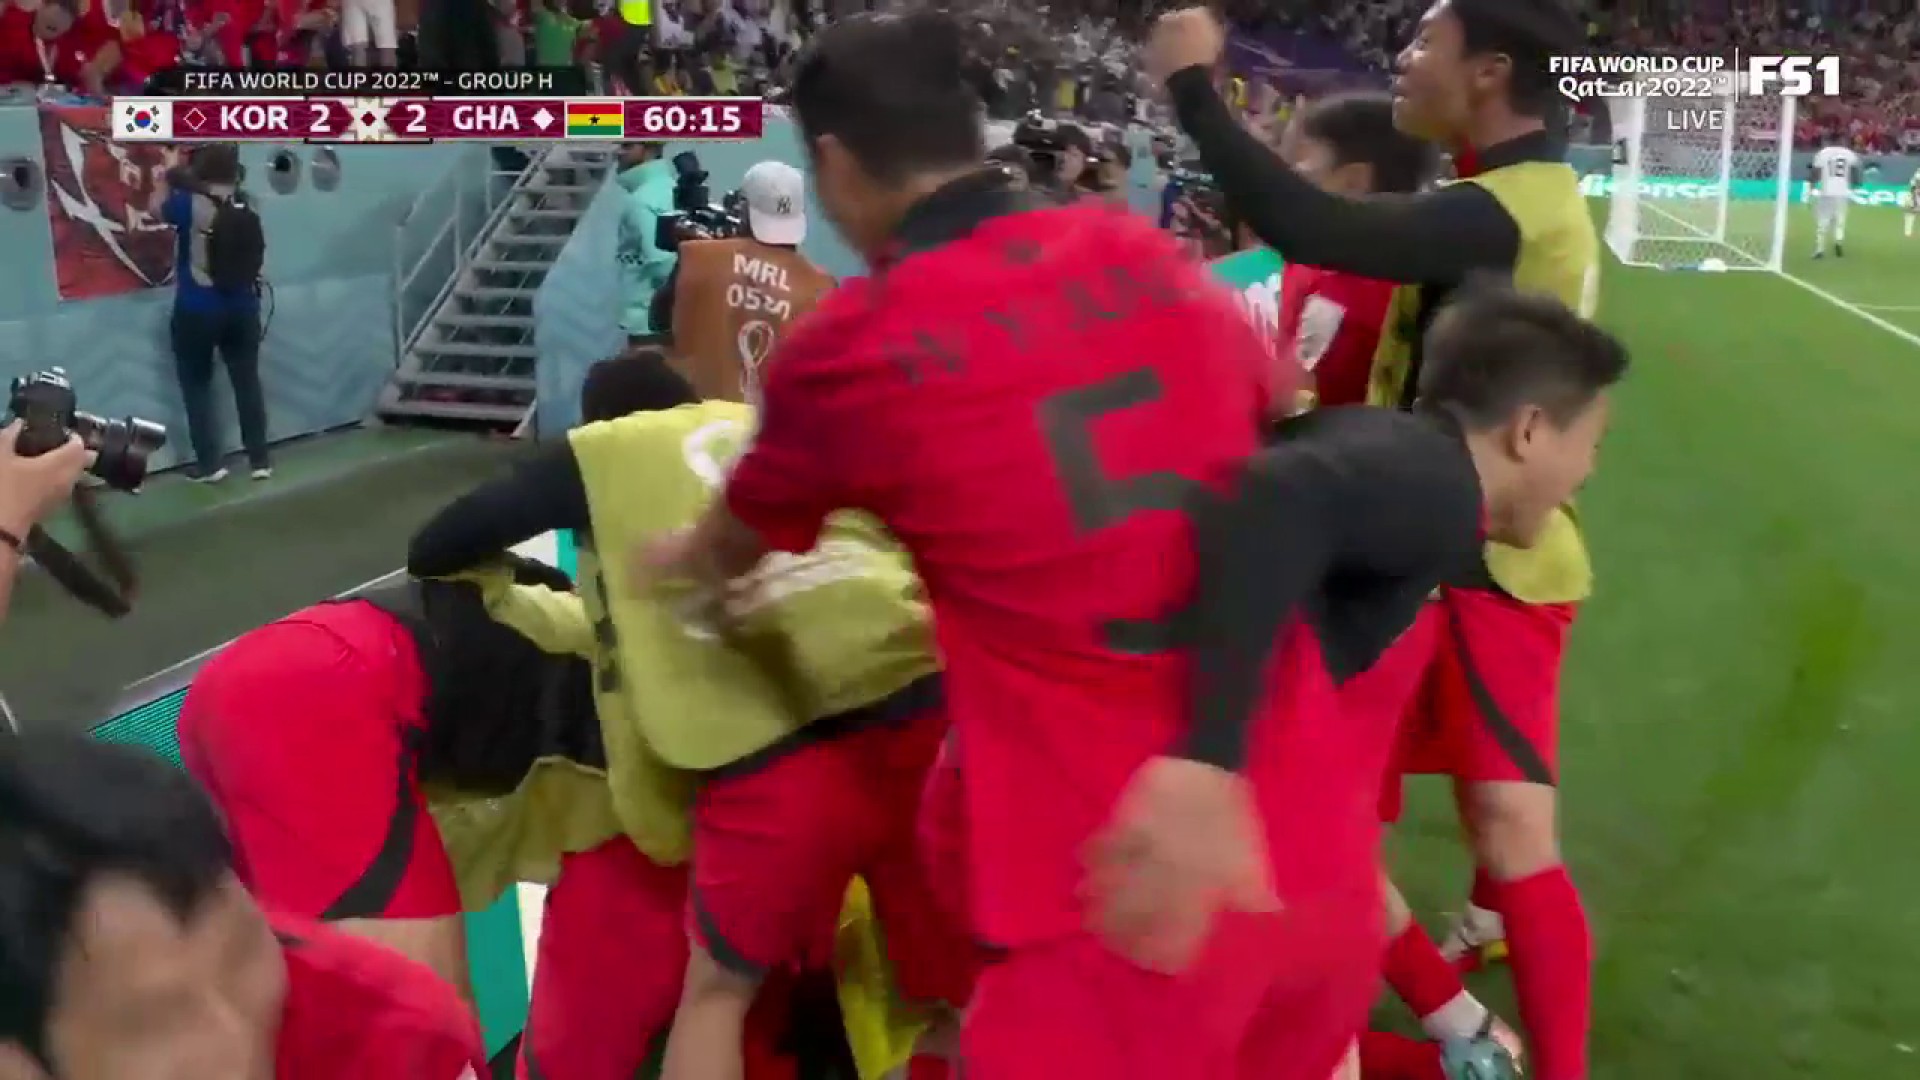 SOUTH KOREA FINDS THE EQUALIZER 🇰🇷

Cho has done it again 🔥”